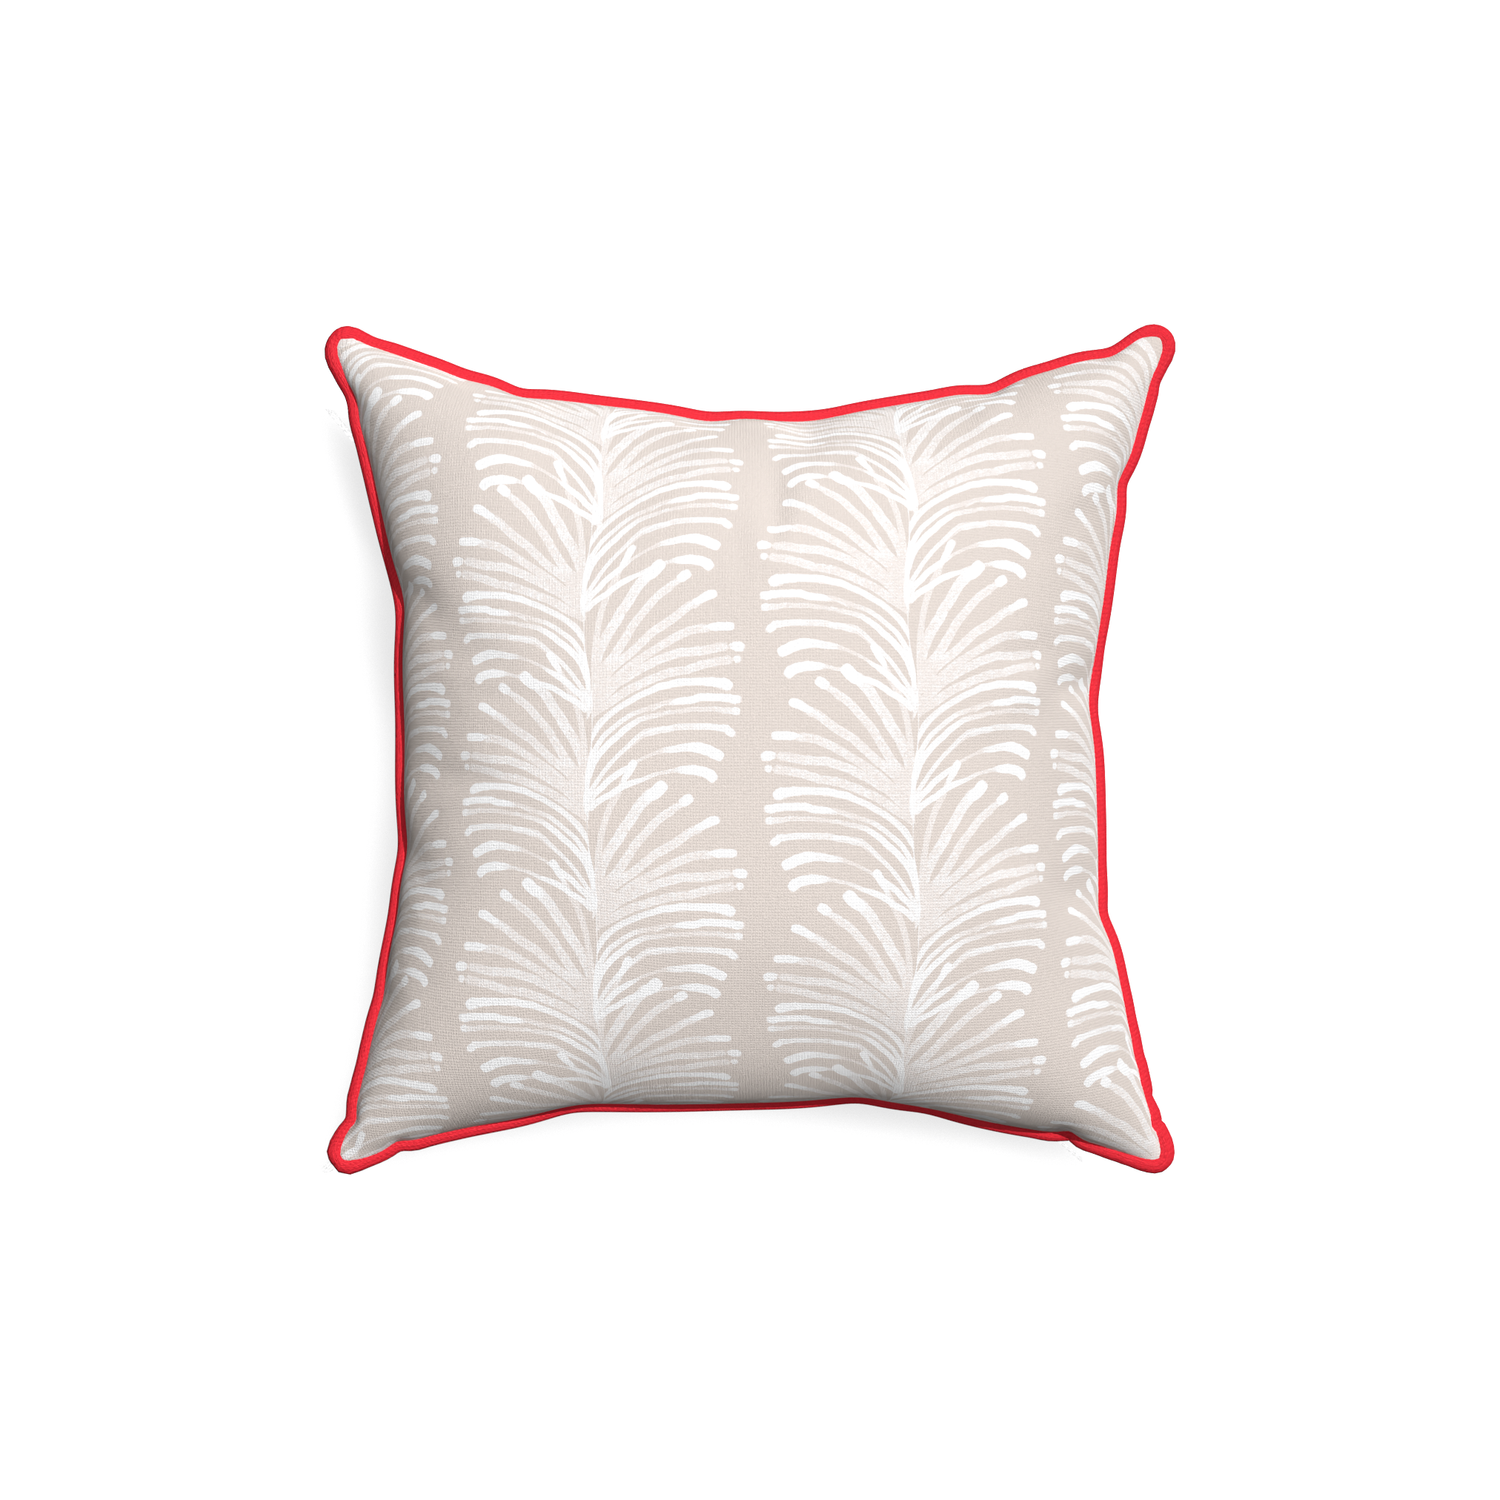 18-square emma sand custom pillow with cherry piping on white background